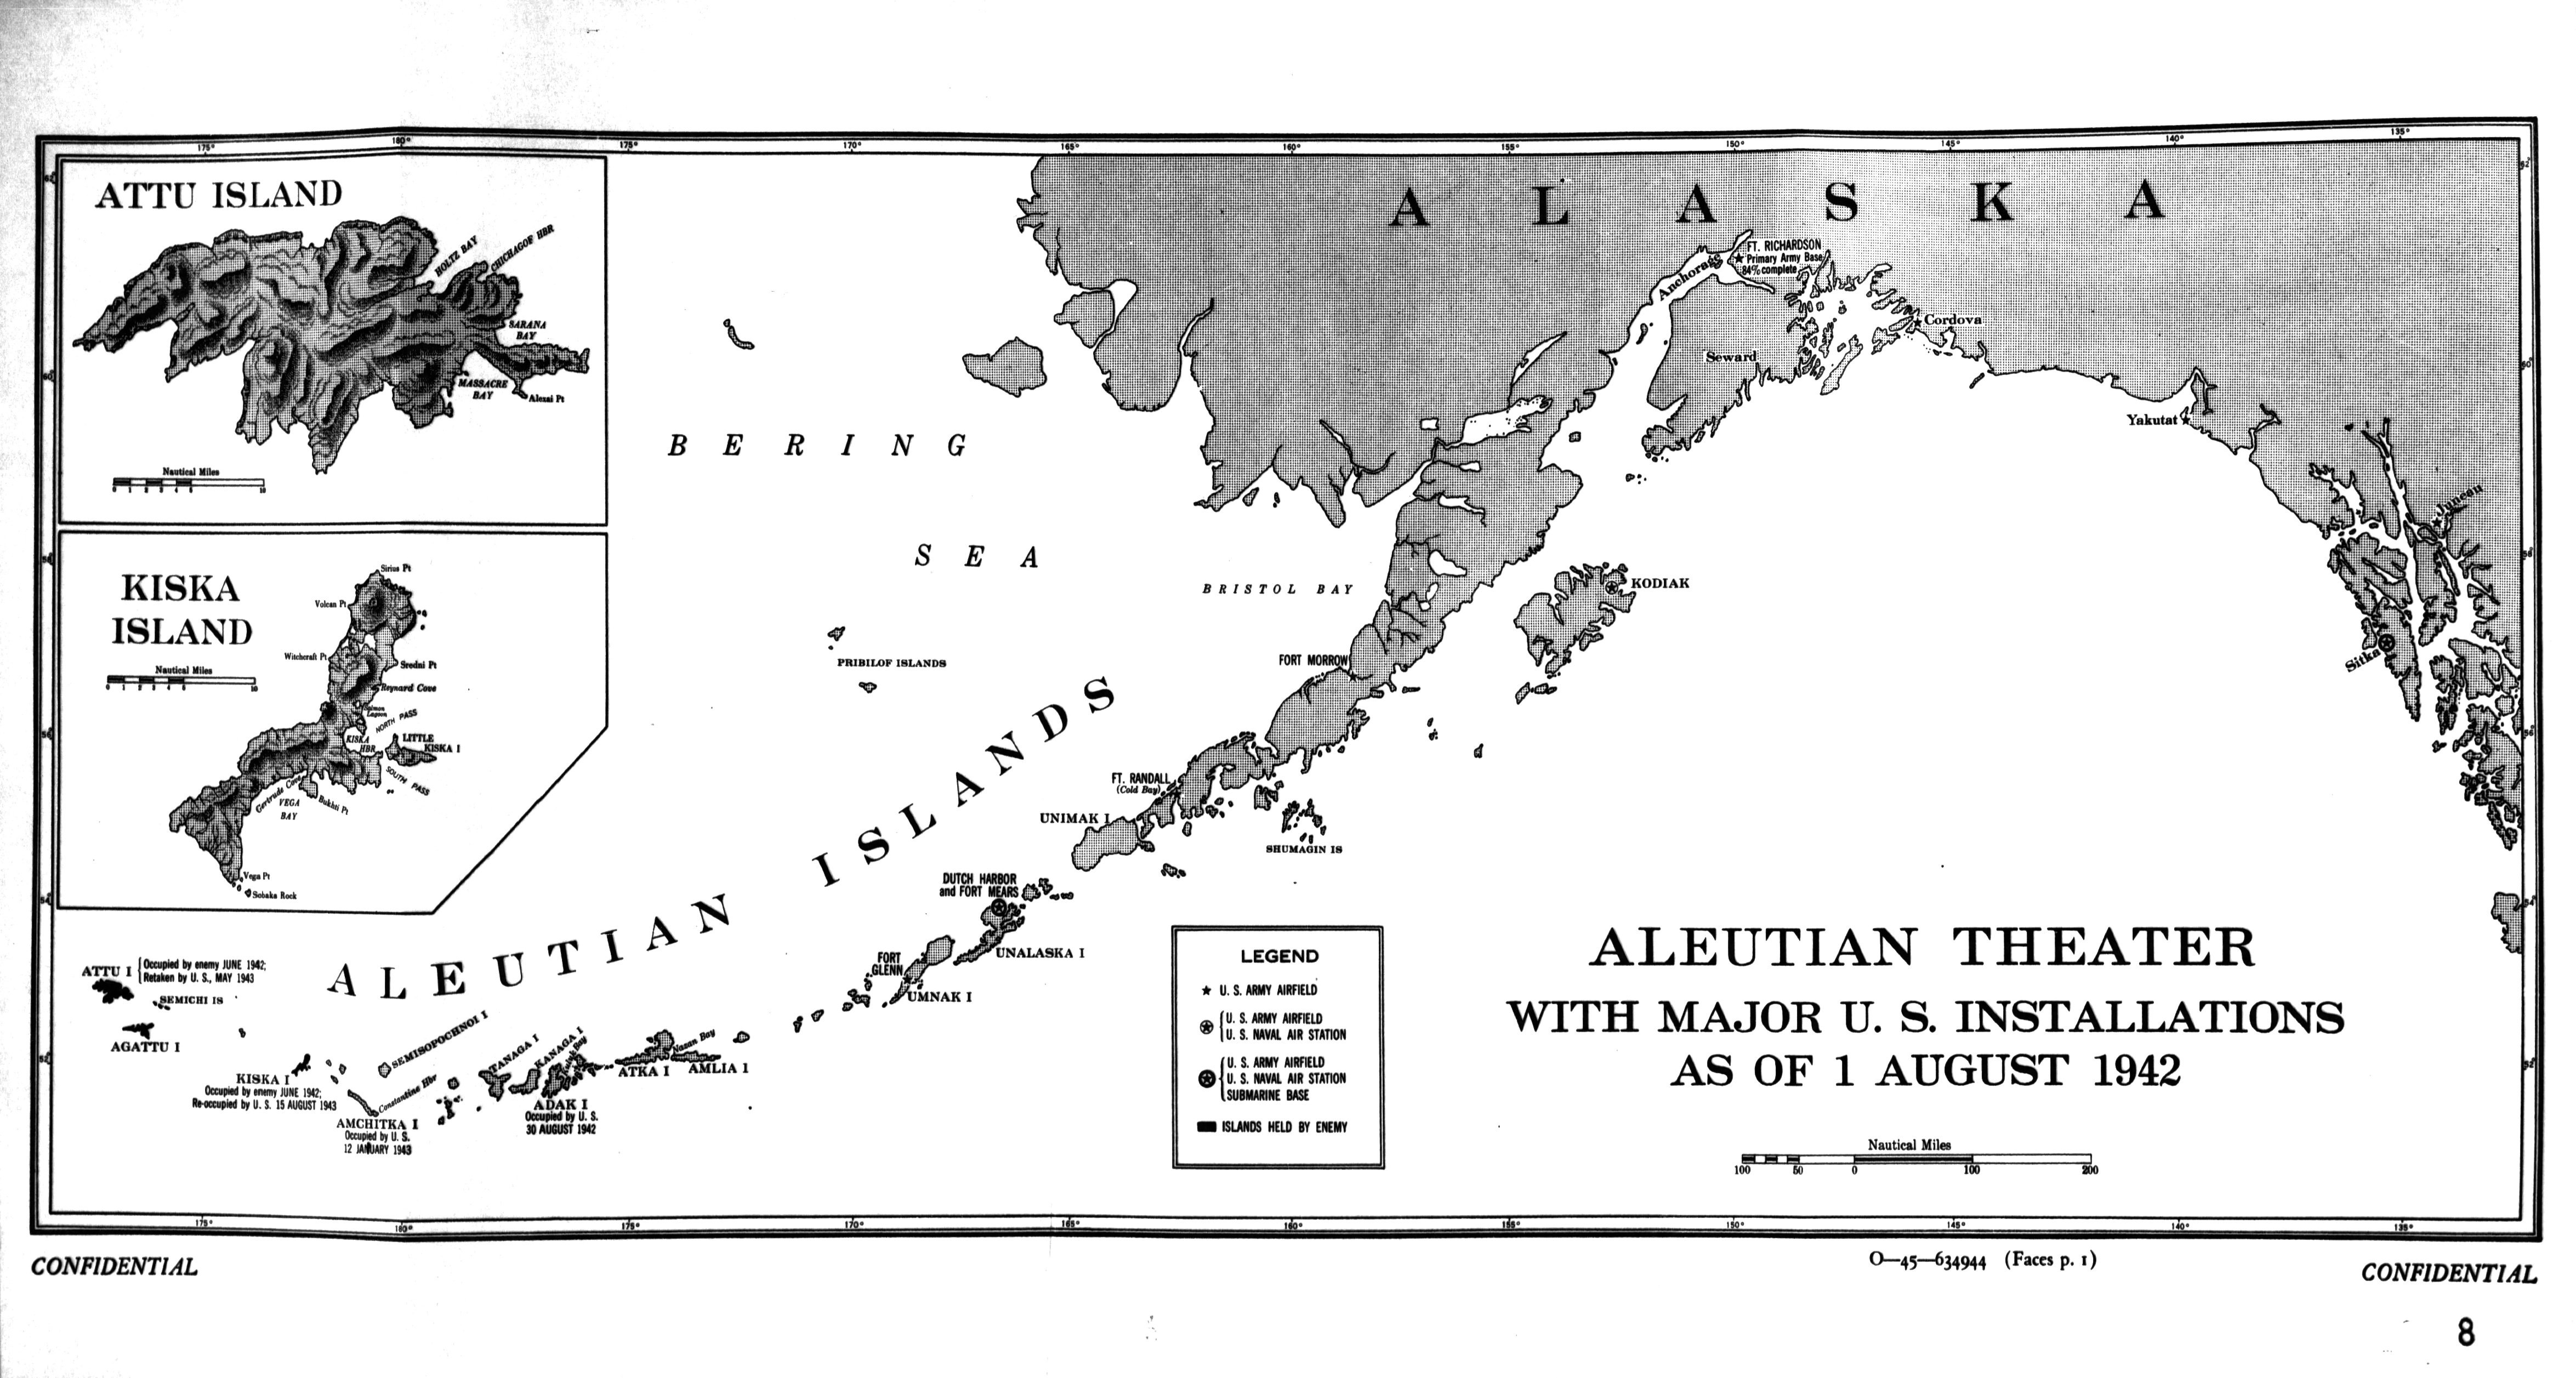 Map of installations in the Aleutian Island Area as of 1 Aug 1942, prepared for the United States Navy Office of Naval Intelligence Combat Narrative report. Note that Attu and Kiska were listed as Japanese held.